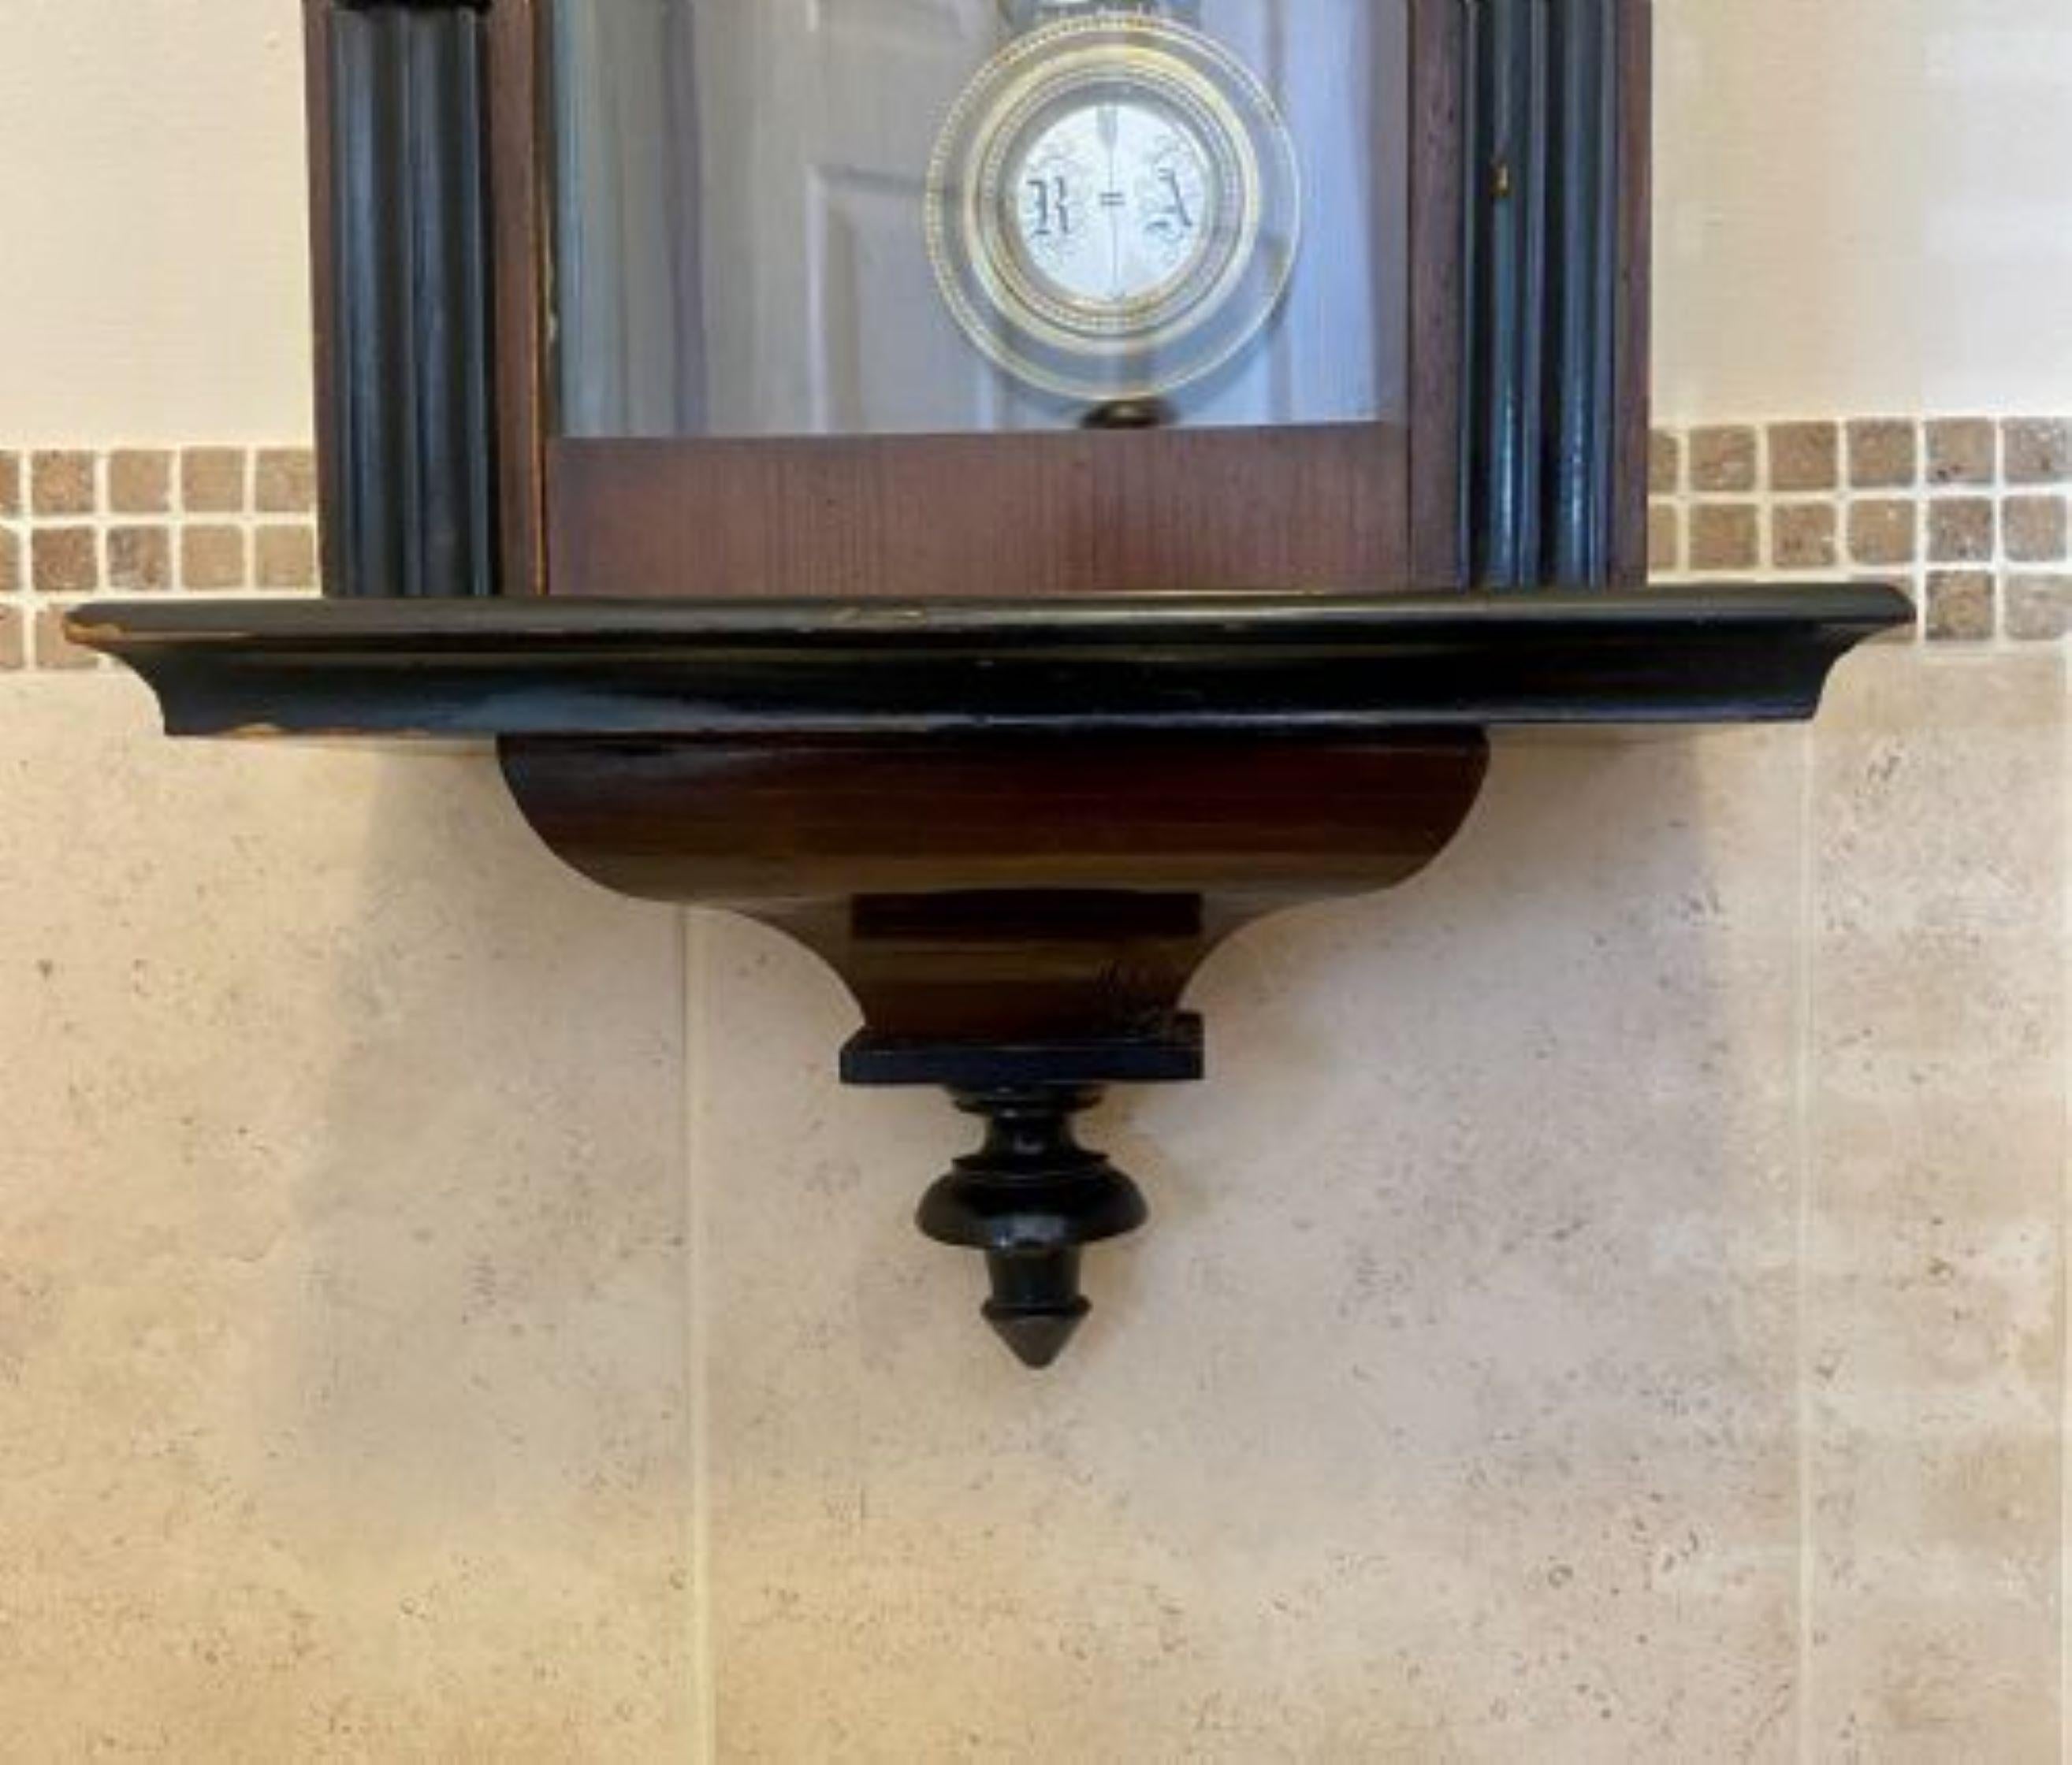 Antique Victorian walnut case Vienna wall clock having a circular porcelain dial with original hands, Roman numerals and original pendulum in a walnut and ebonised case with bobbing turned columns 
Please note all of our clocks are serviced prior to